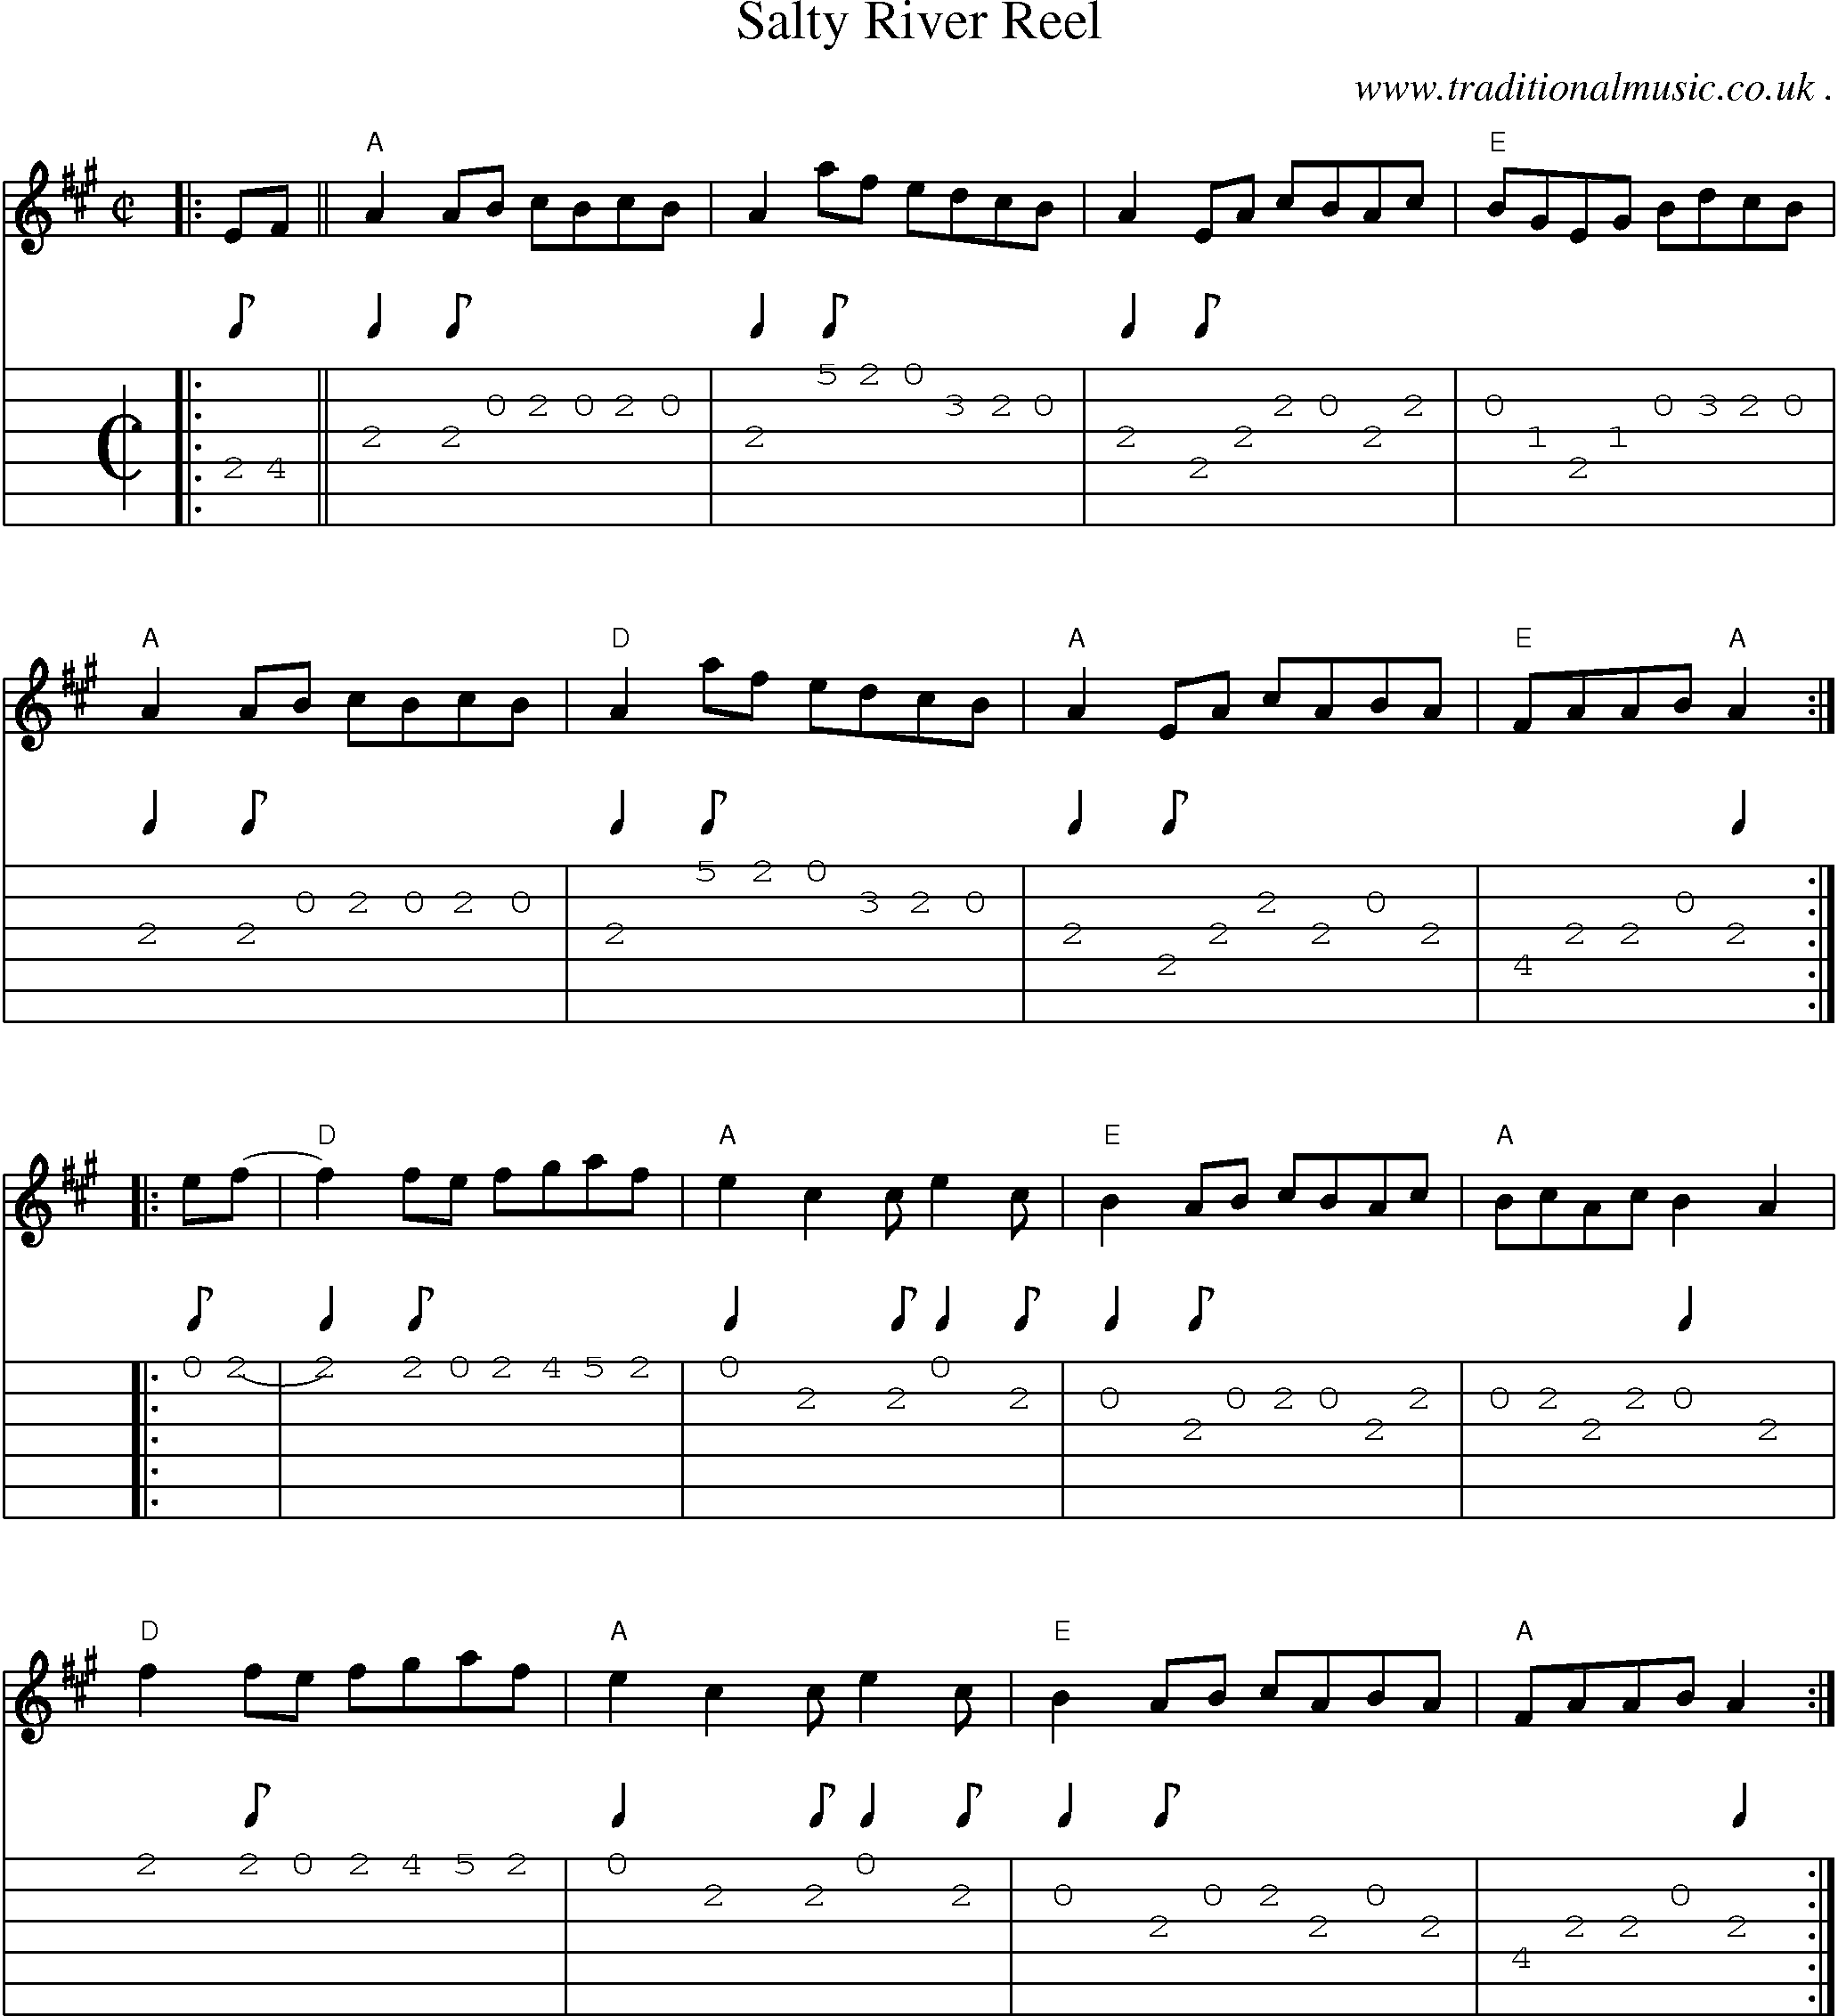 Music Score and Guitar Tabs for Salty River Reel